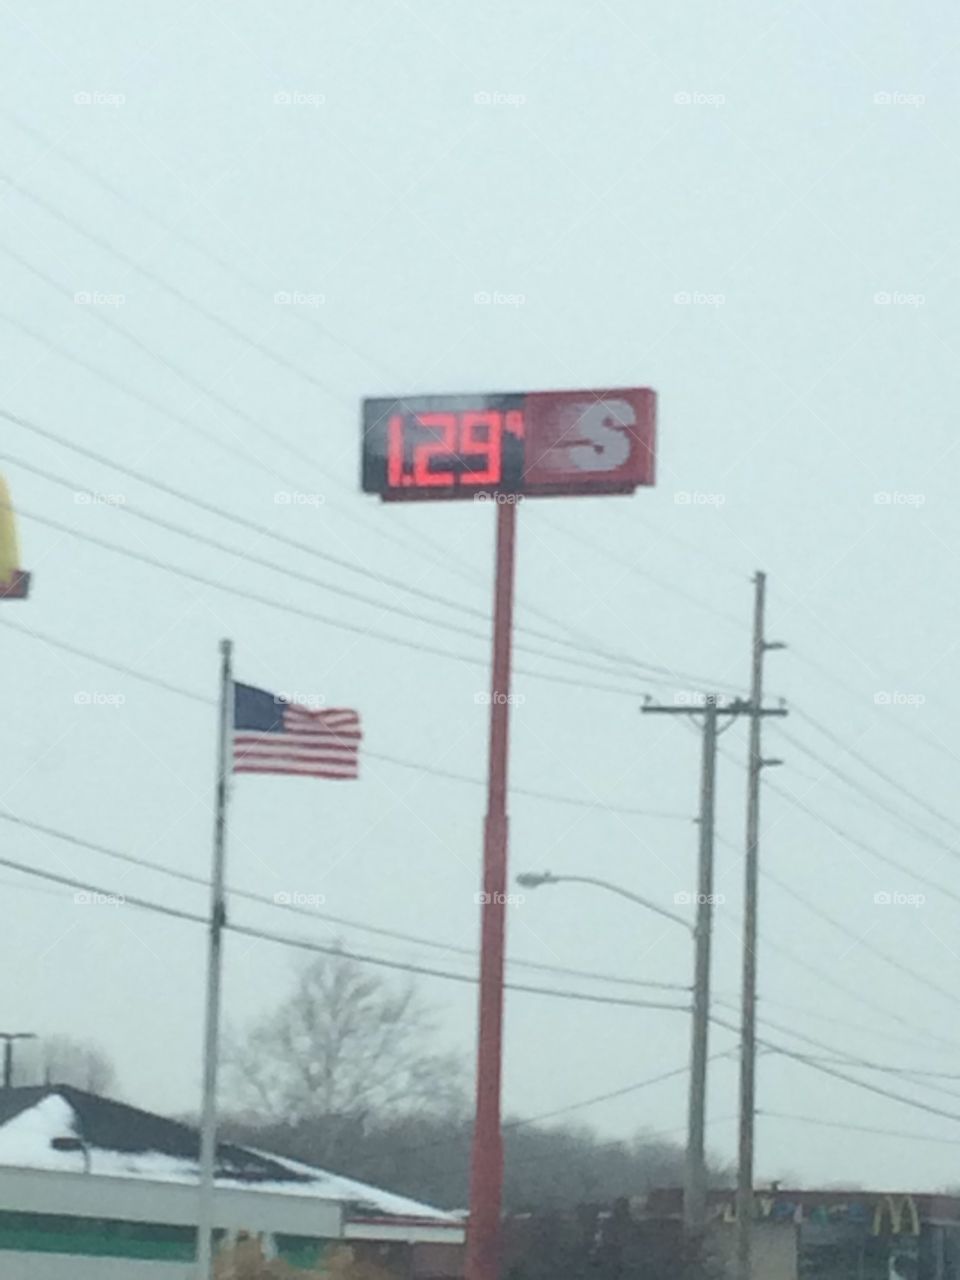 Speedway gas Dover Ohio never thought gas would be this cheap again.  the American flag